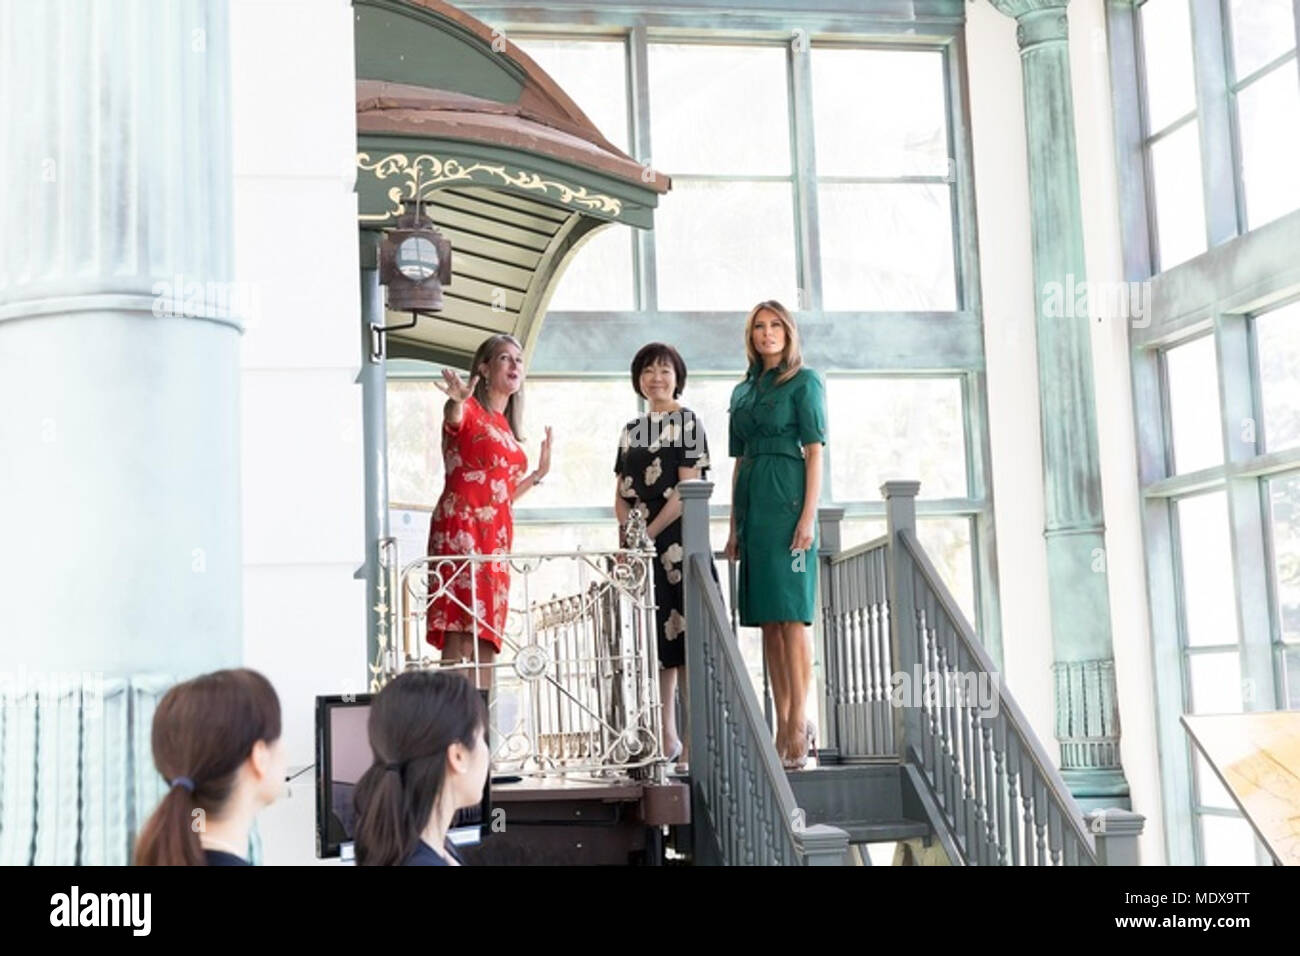 PALM BEACH, FL - WEEK OF APRIL 16: First Lady Melania Trump and Mrs. Akie Abe, wife of Japanese Prime Minister Shinzo Abe, tour the Henry Flagler Museum, Wednesday, April 18, 2018, in Palm Beach, FL. The 120-year-old Gilded Age estate, known as Whitehall, was built in 1902 by Henry Morrison Flagler.   People:  President Donald Trump Stock Photo